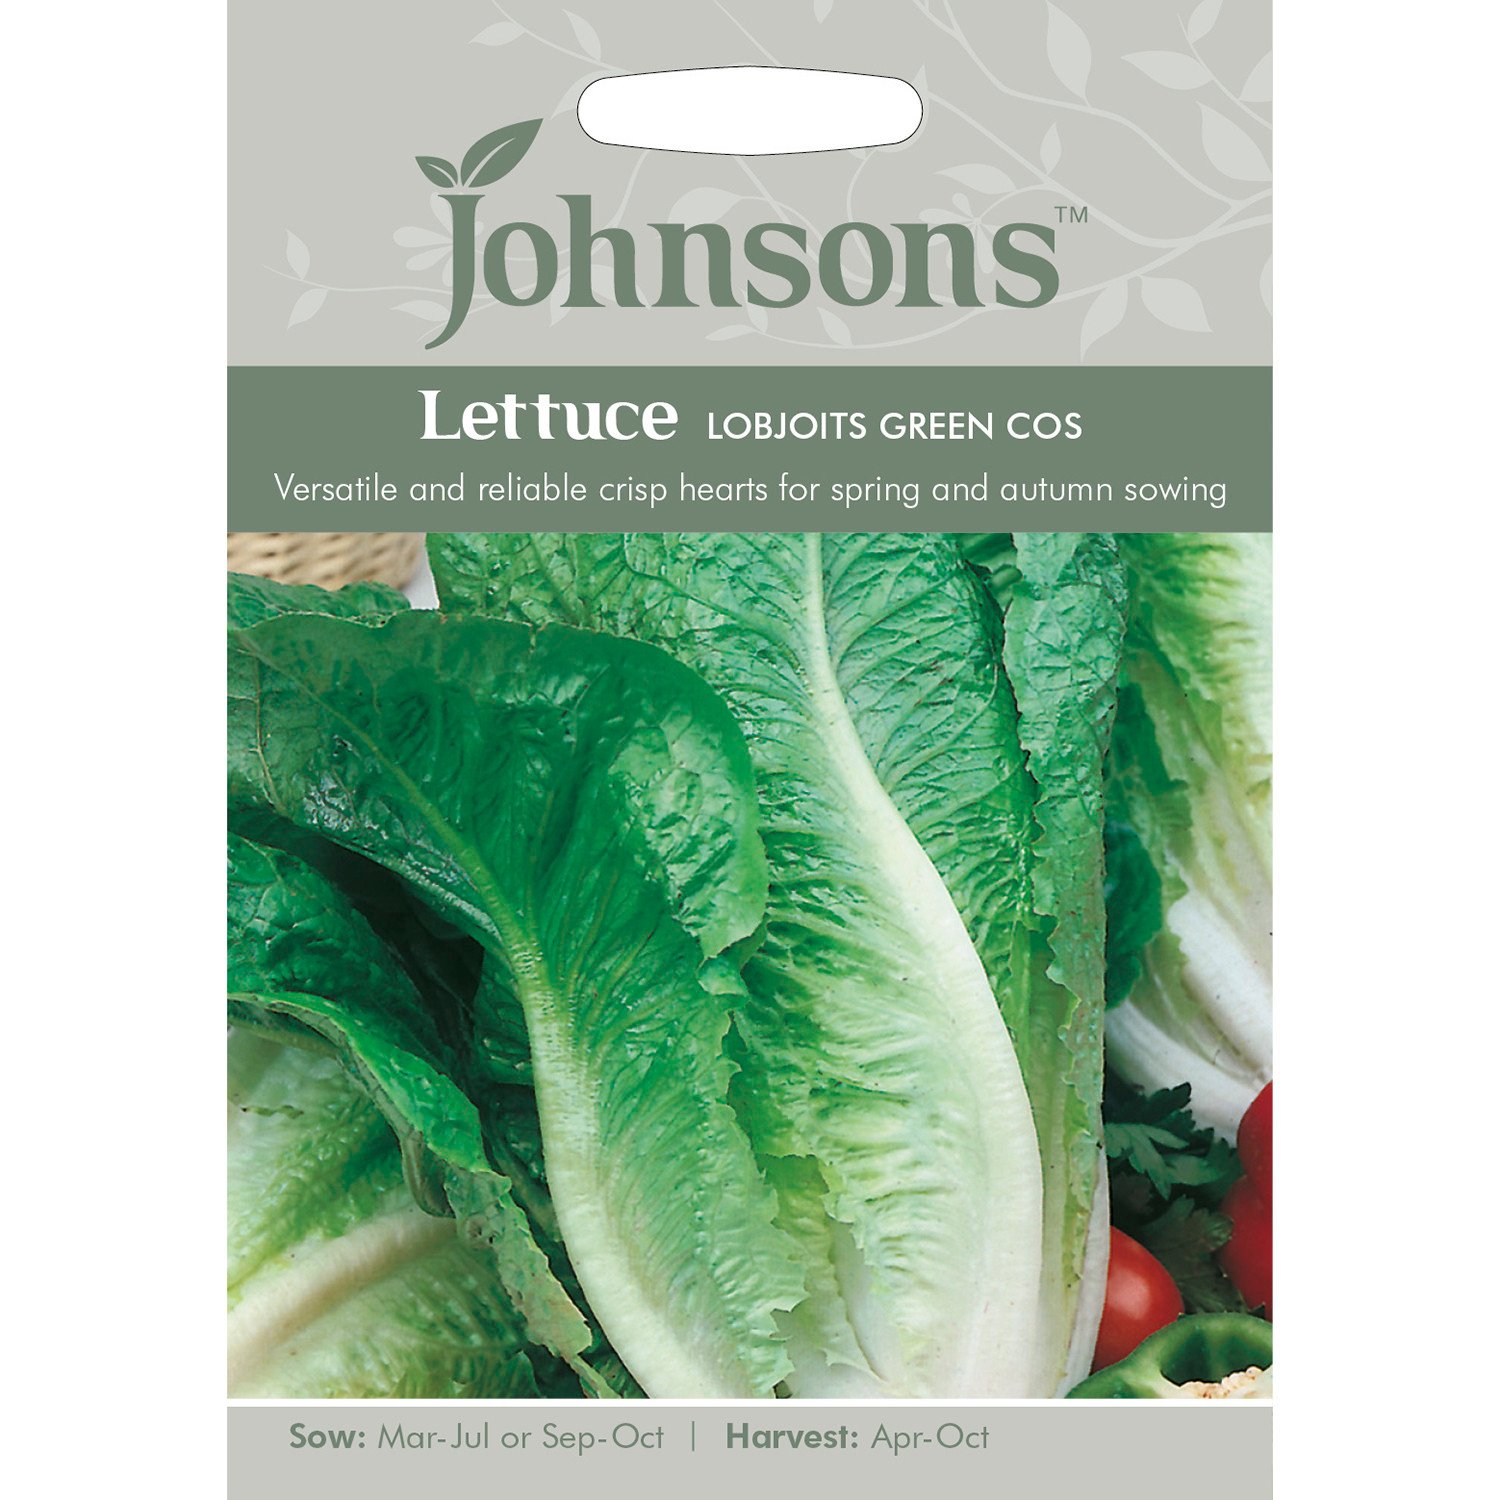 Pack of Lettuce Lobjoits Green Cos Seeds Image 1